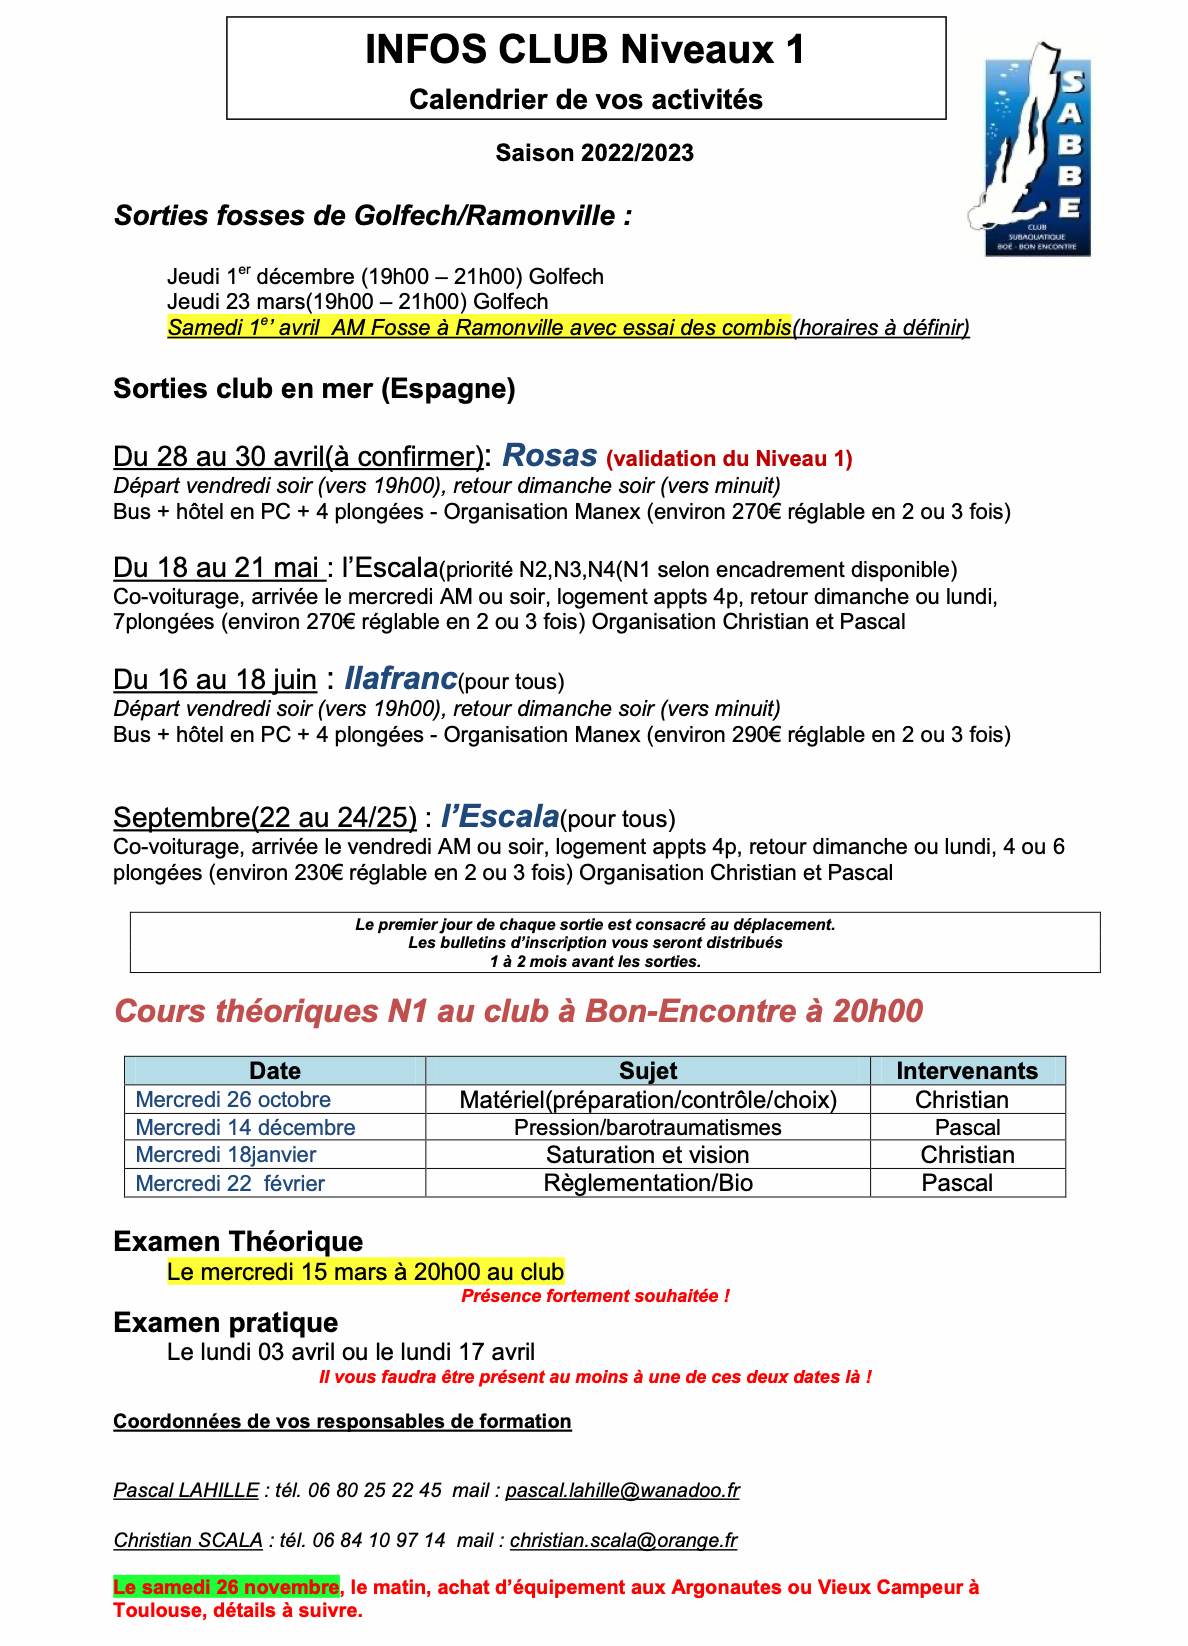 Calendrier cours N1 2022-2023